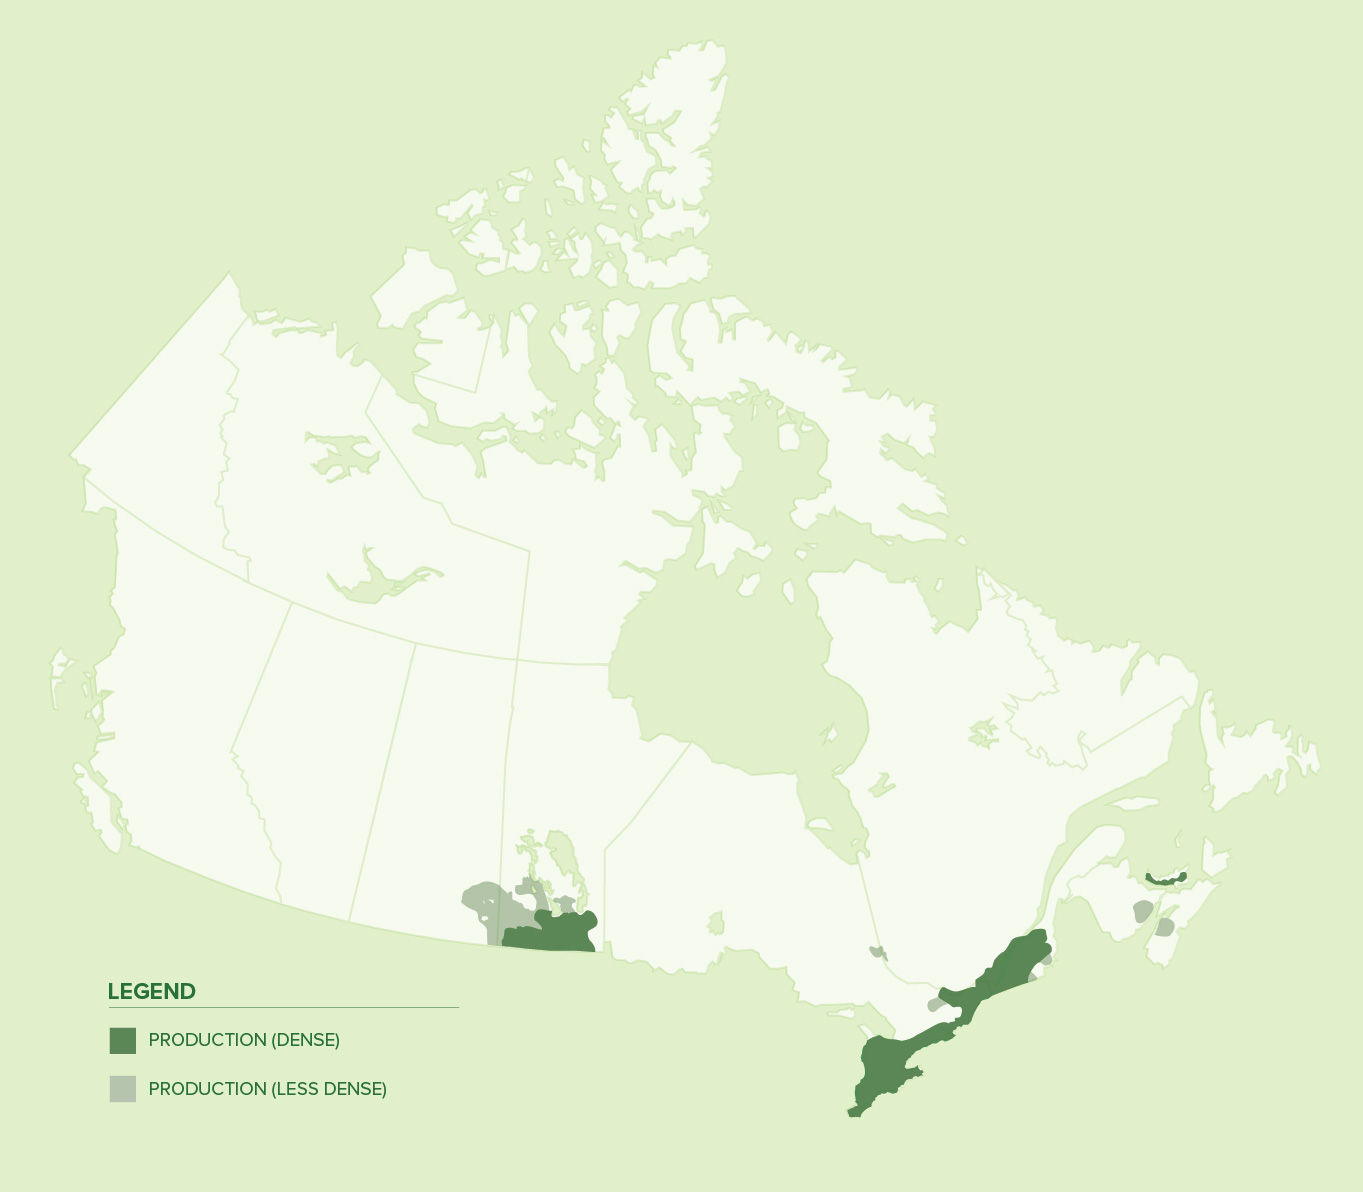 Soybean Growing Areas in Canada